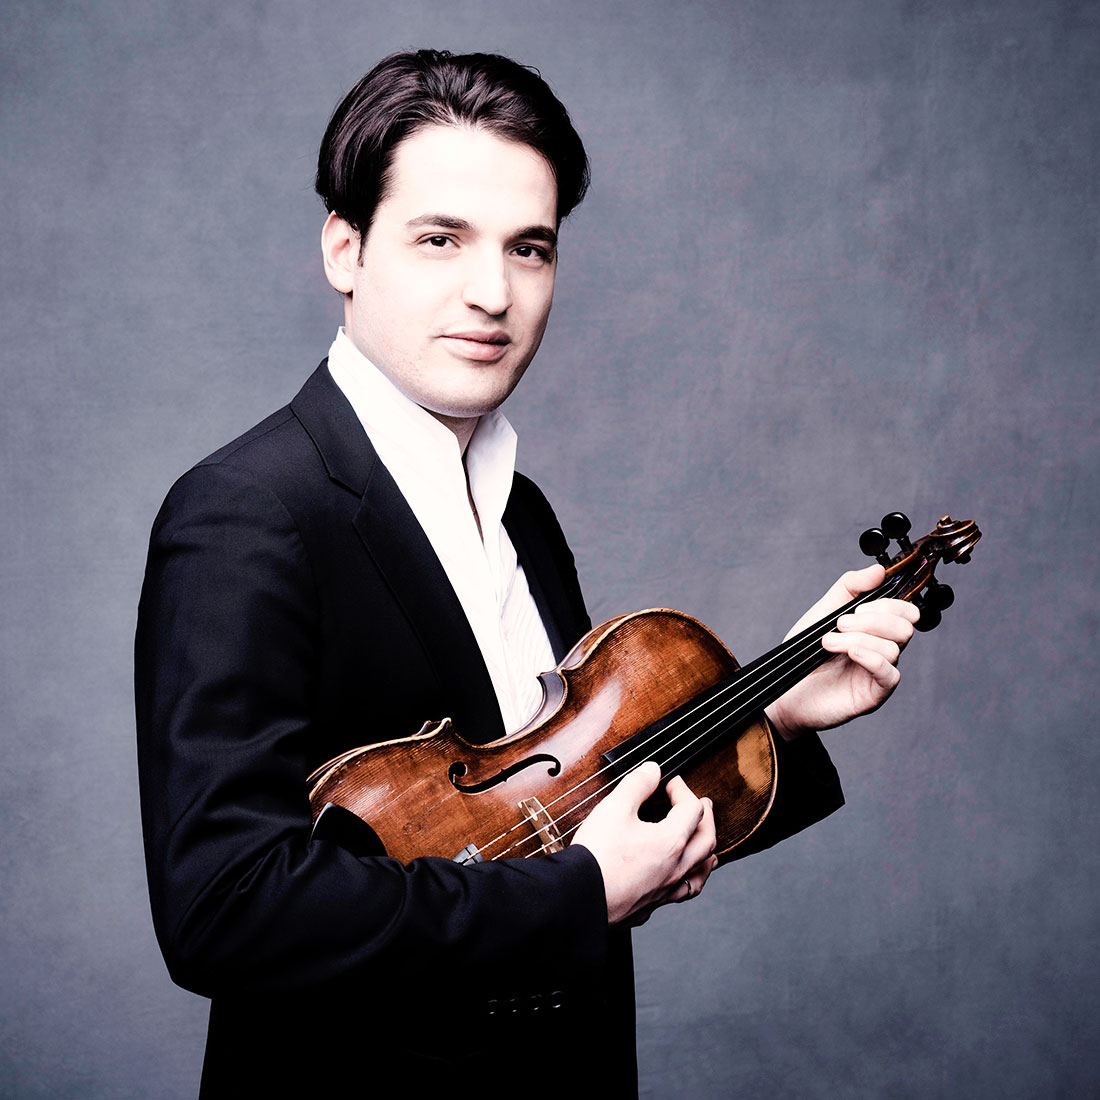 Nathan Braude: “My Main Challenge Is Taking My Viola Every Day, Searching, and Coming a Little Closer to What I Feel inside of Me Each Time”